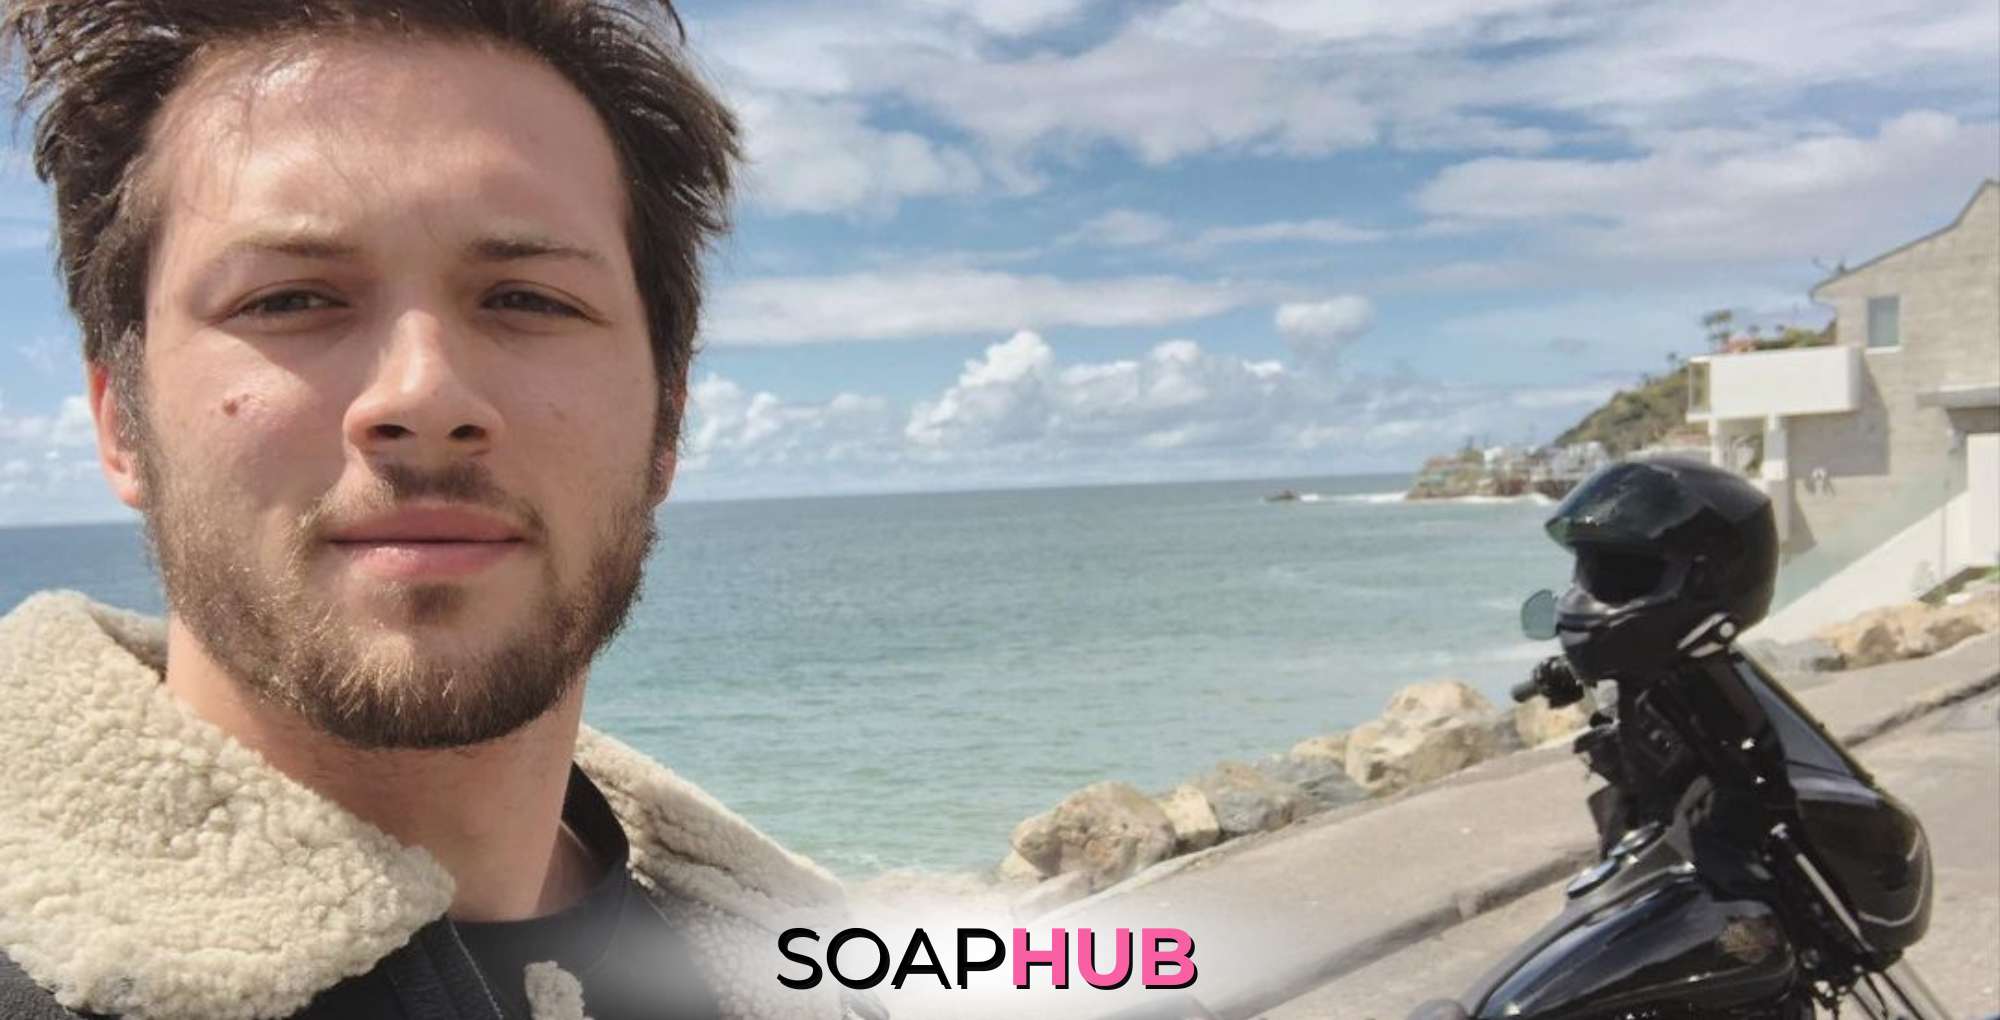 Days of our Lives actor Leo Howard with the Soap Hub logo across the bottom.